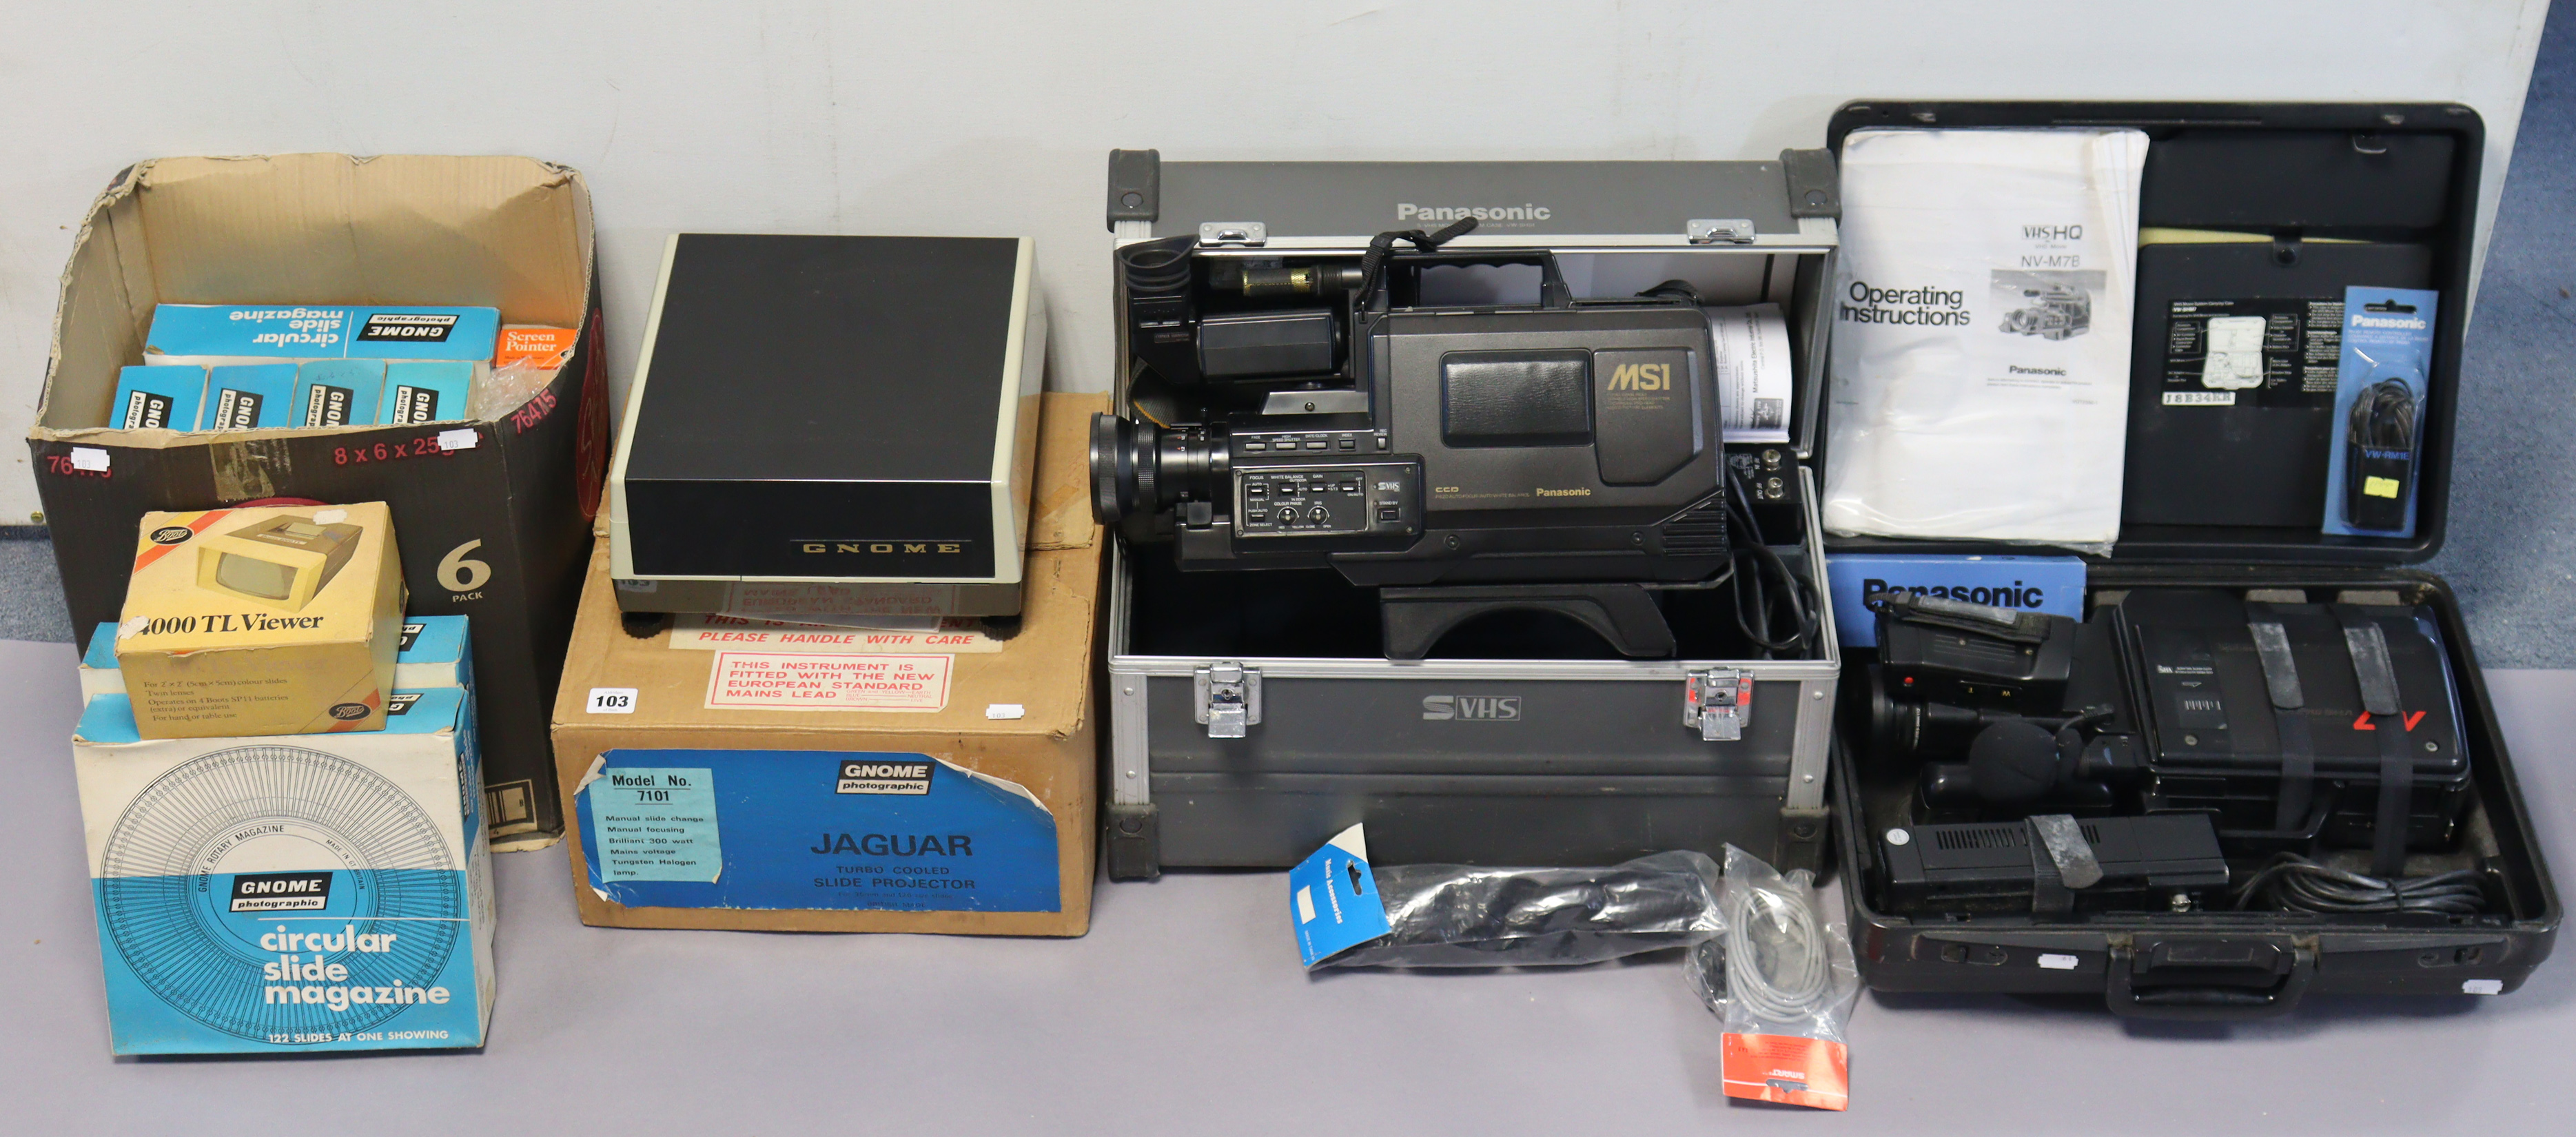 Two Panasonic VHS movie cameras, both cased, a Jaguar slide-projector, boxed, and various circular